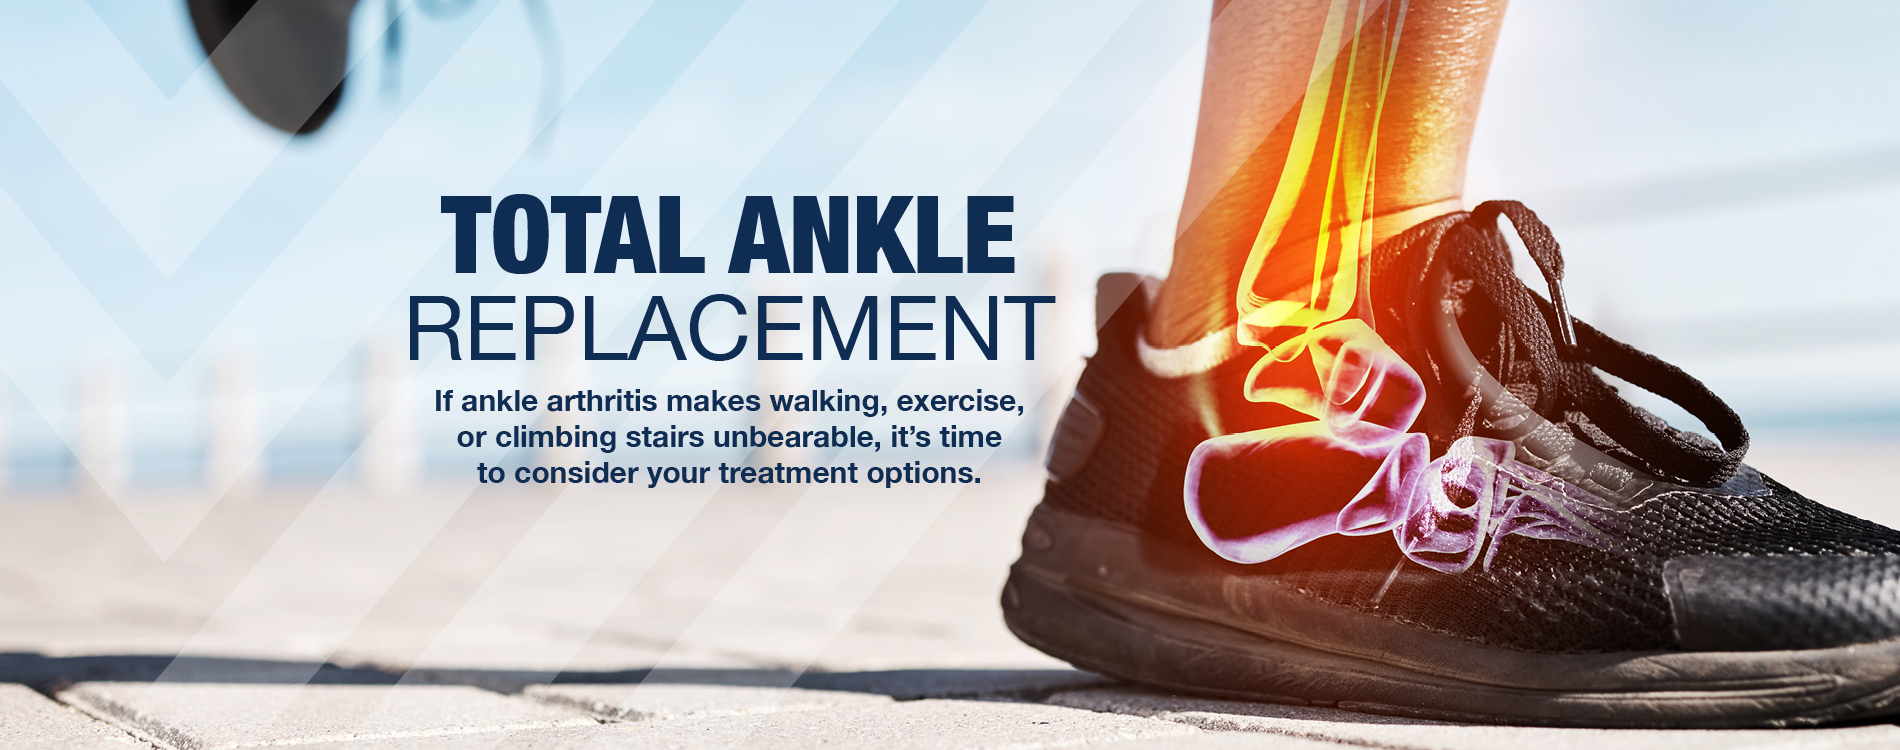 Total Ankle Replacement If ankle arthritis make walking, exercise, or climbing stairs unbearable, it